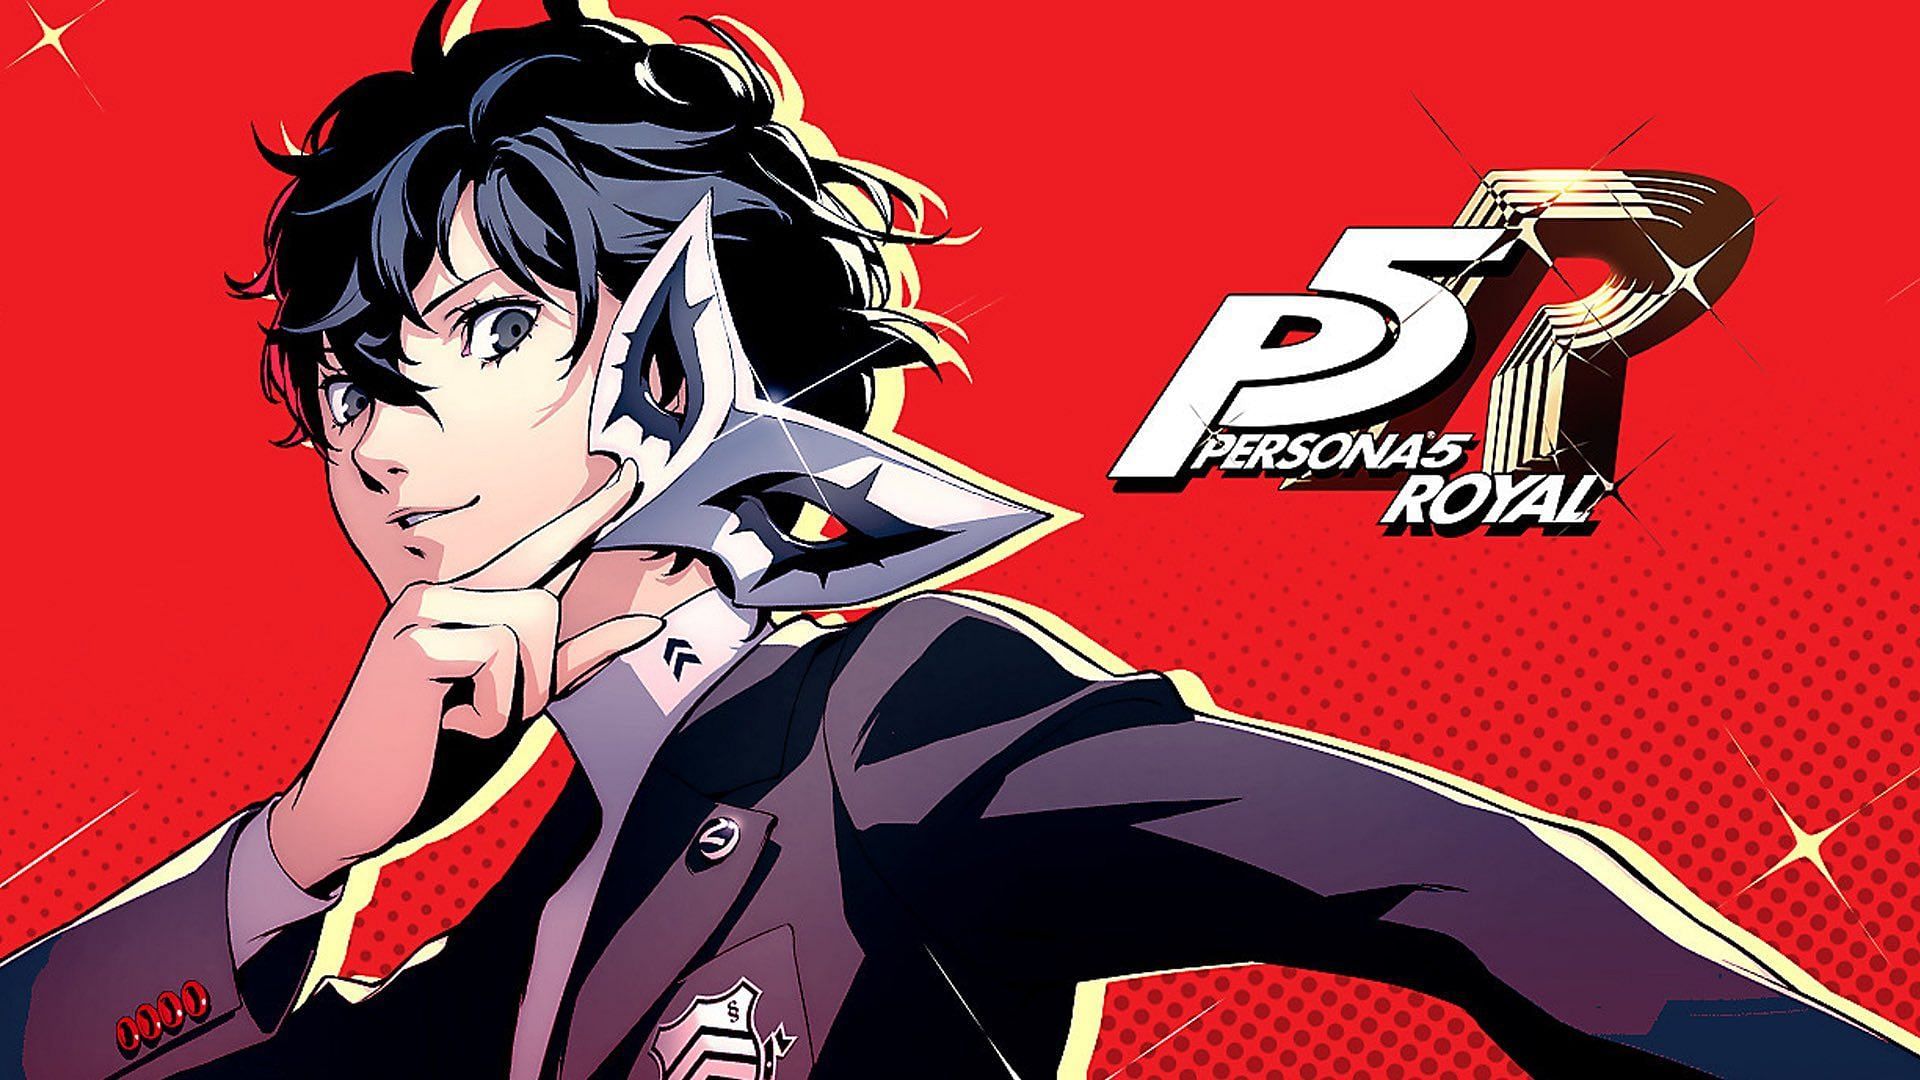 Joker, the protagonist and a second-year transfer student at the Shujin Academy (Image via PlayStation)